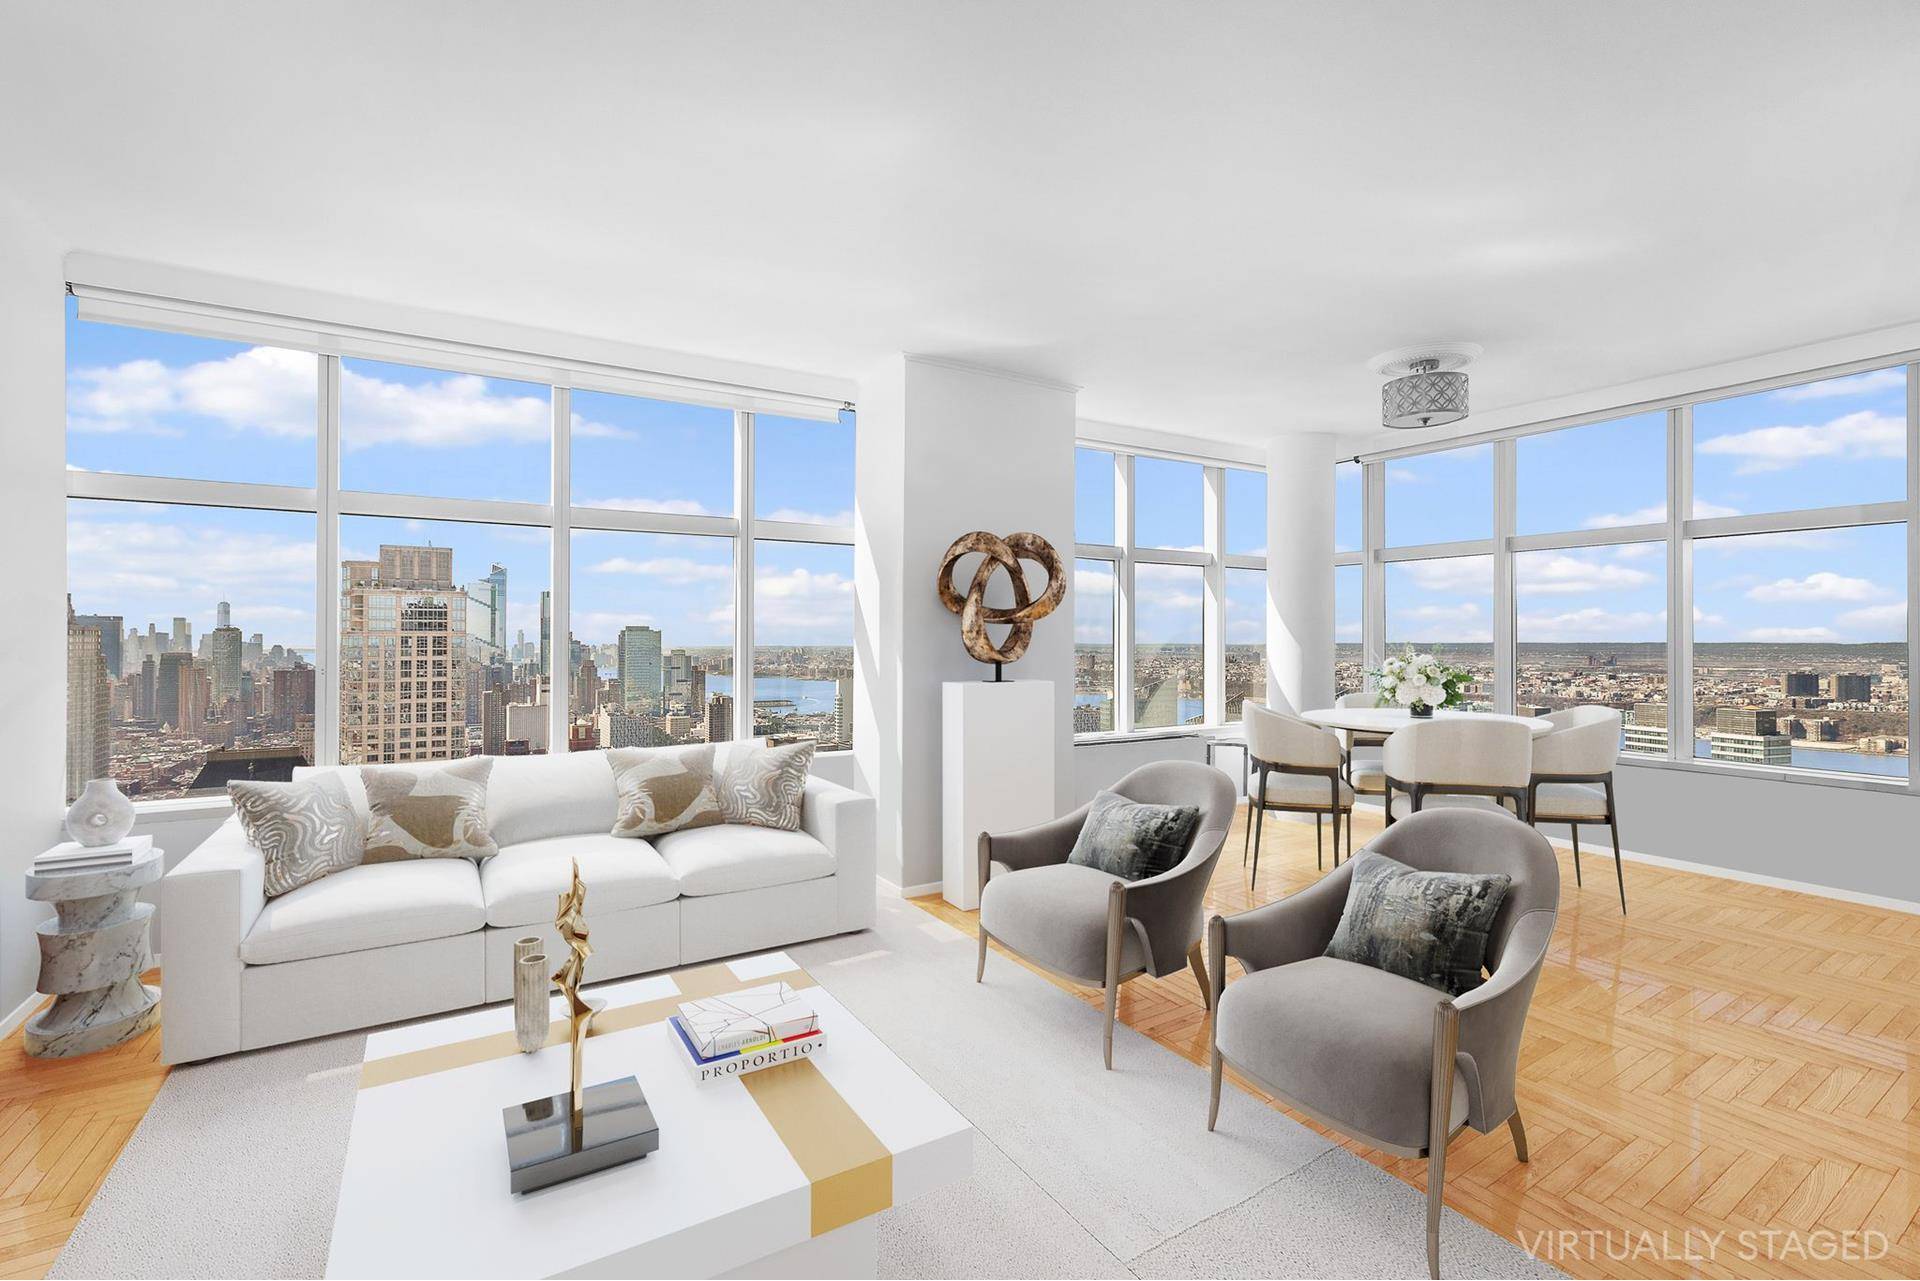 Incredible panoramic views from this fantastic high floor condo.